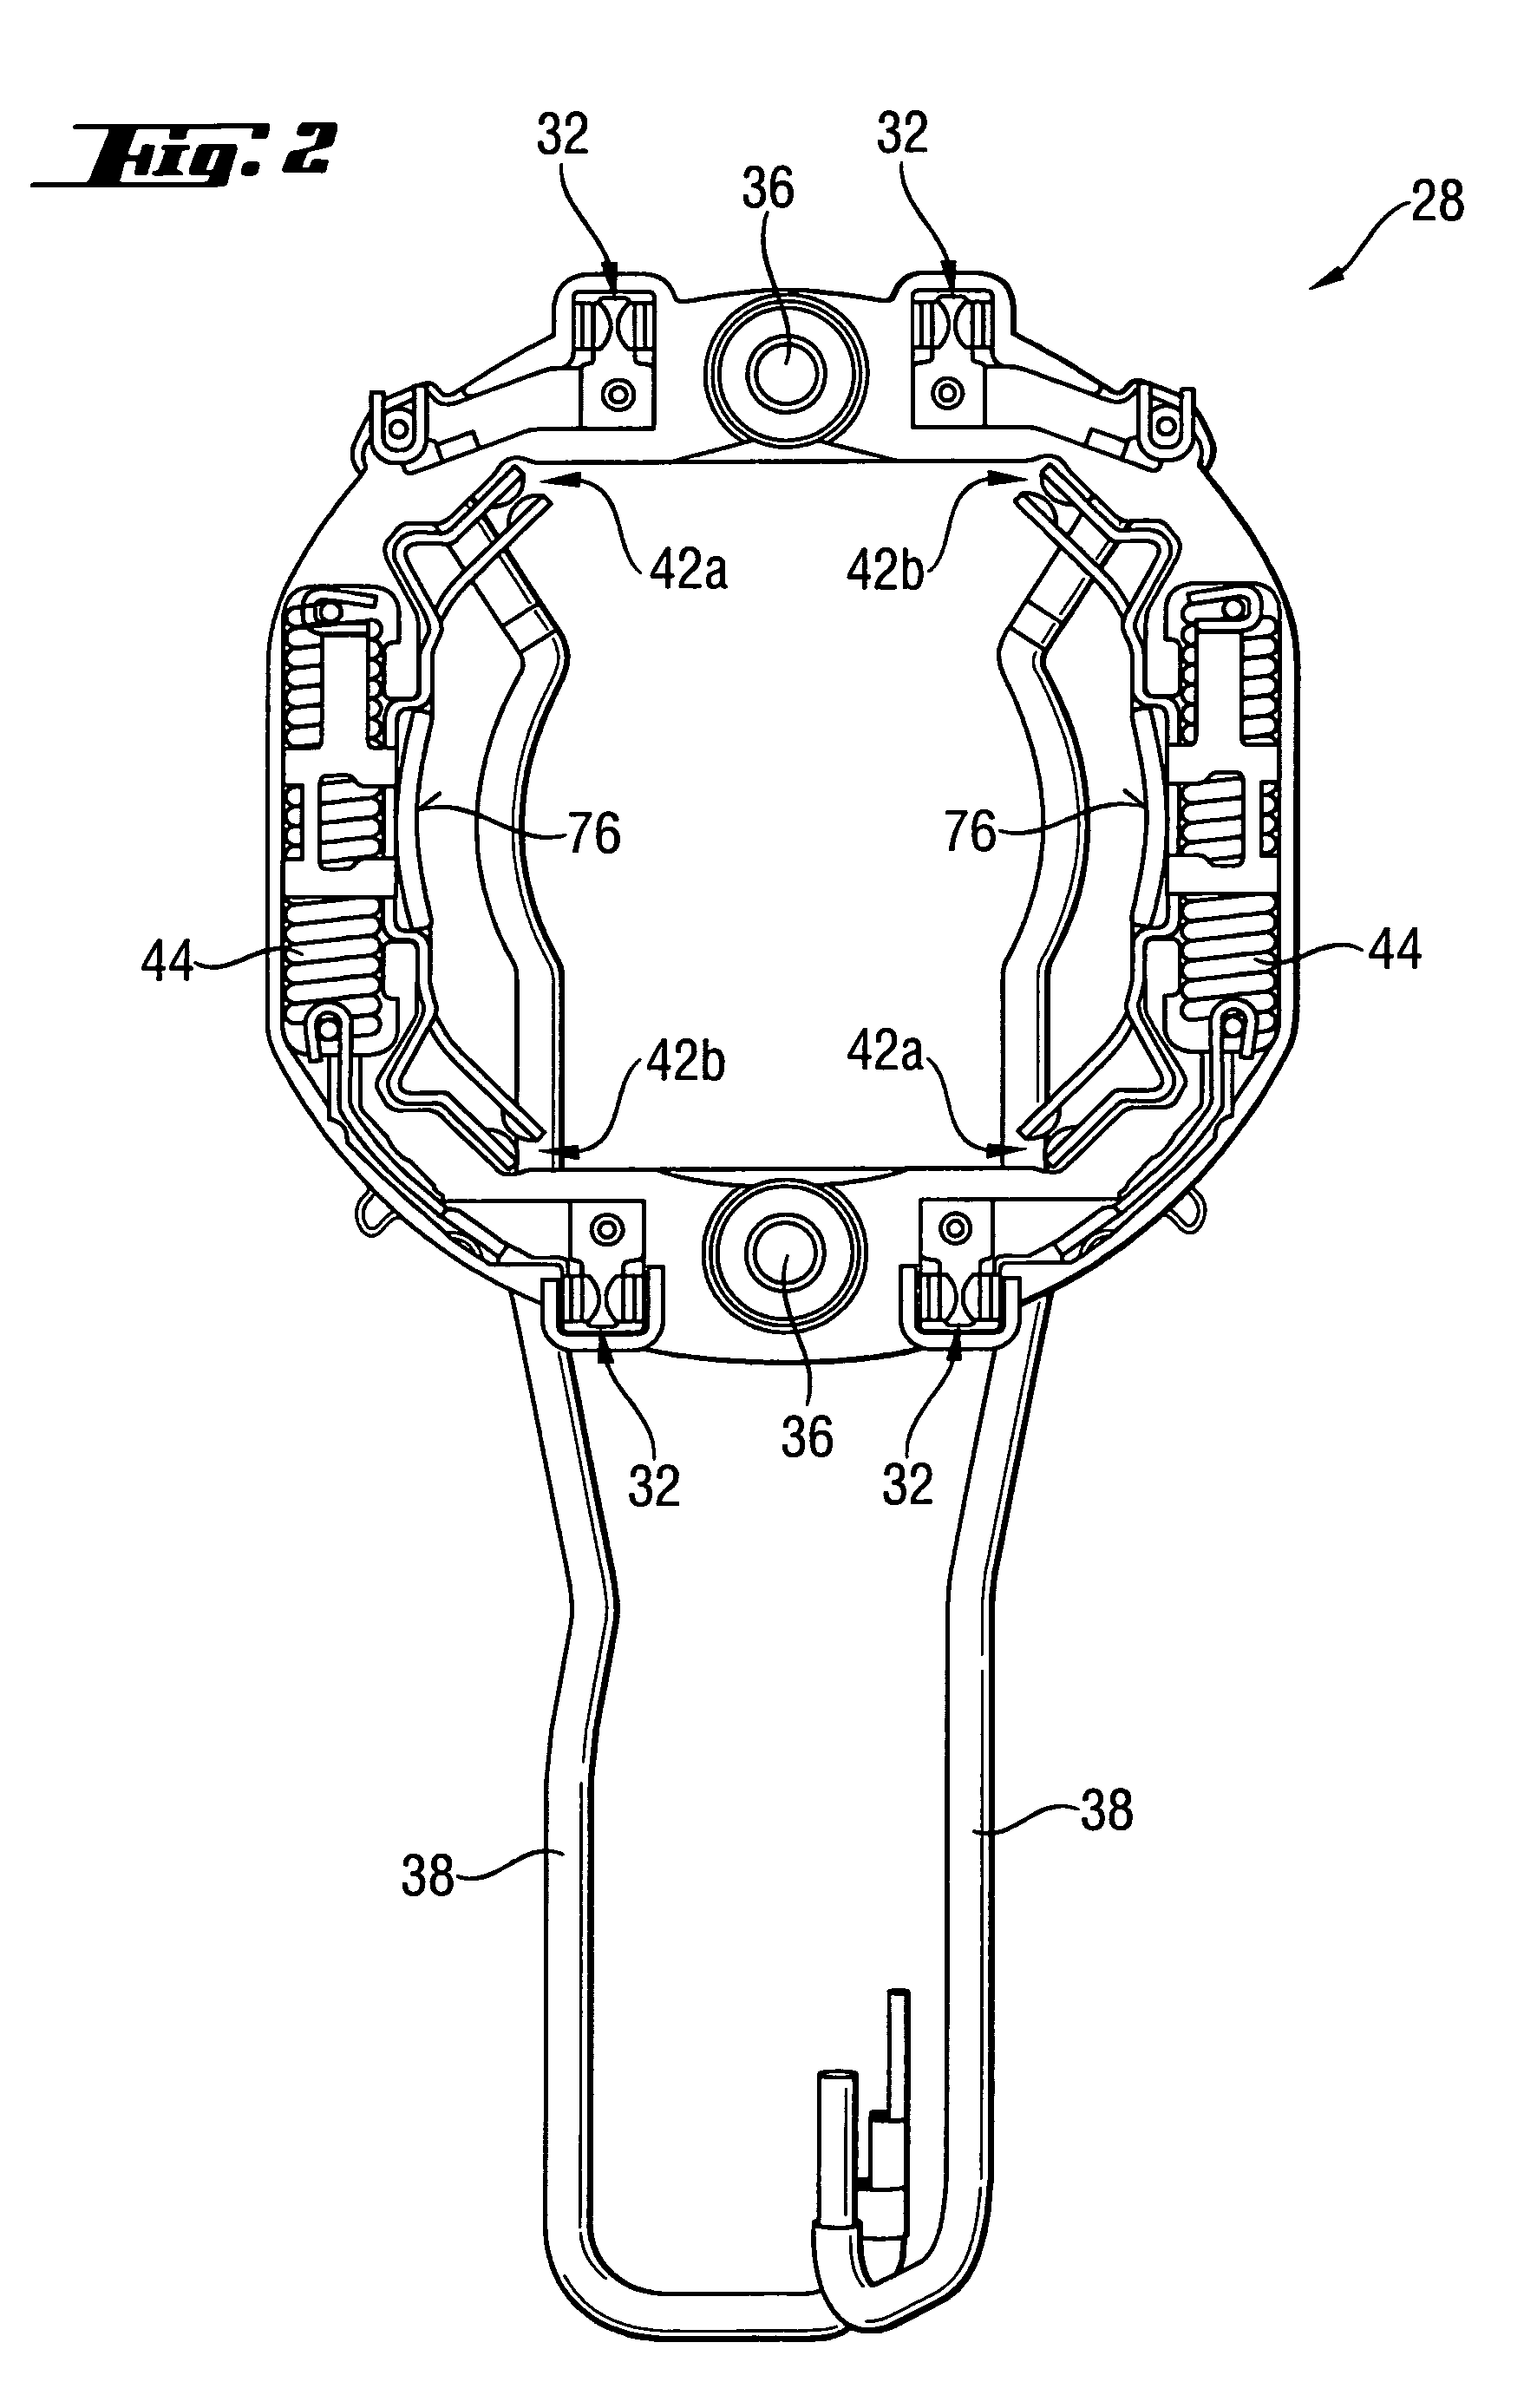 Device for reversing rotational direction of a motor